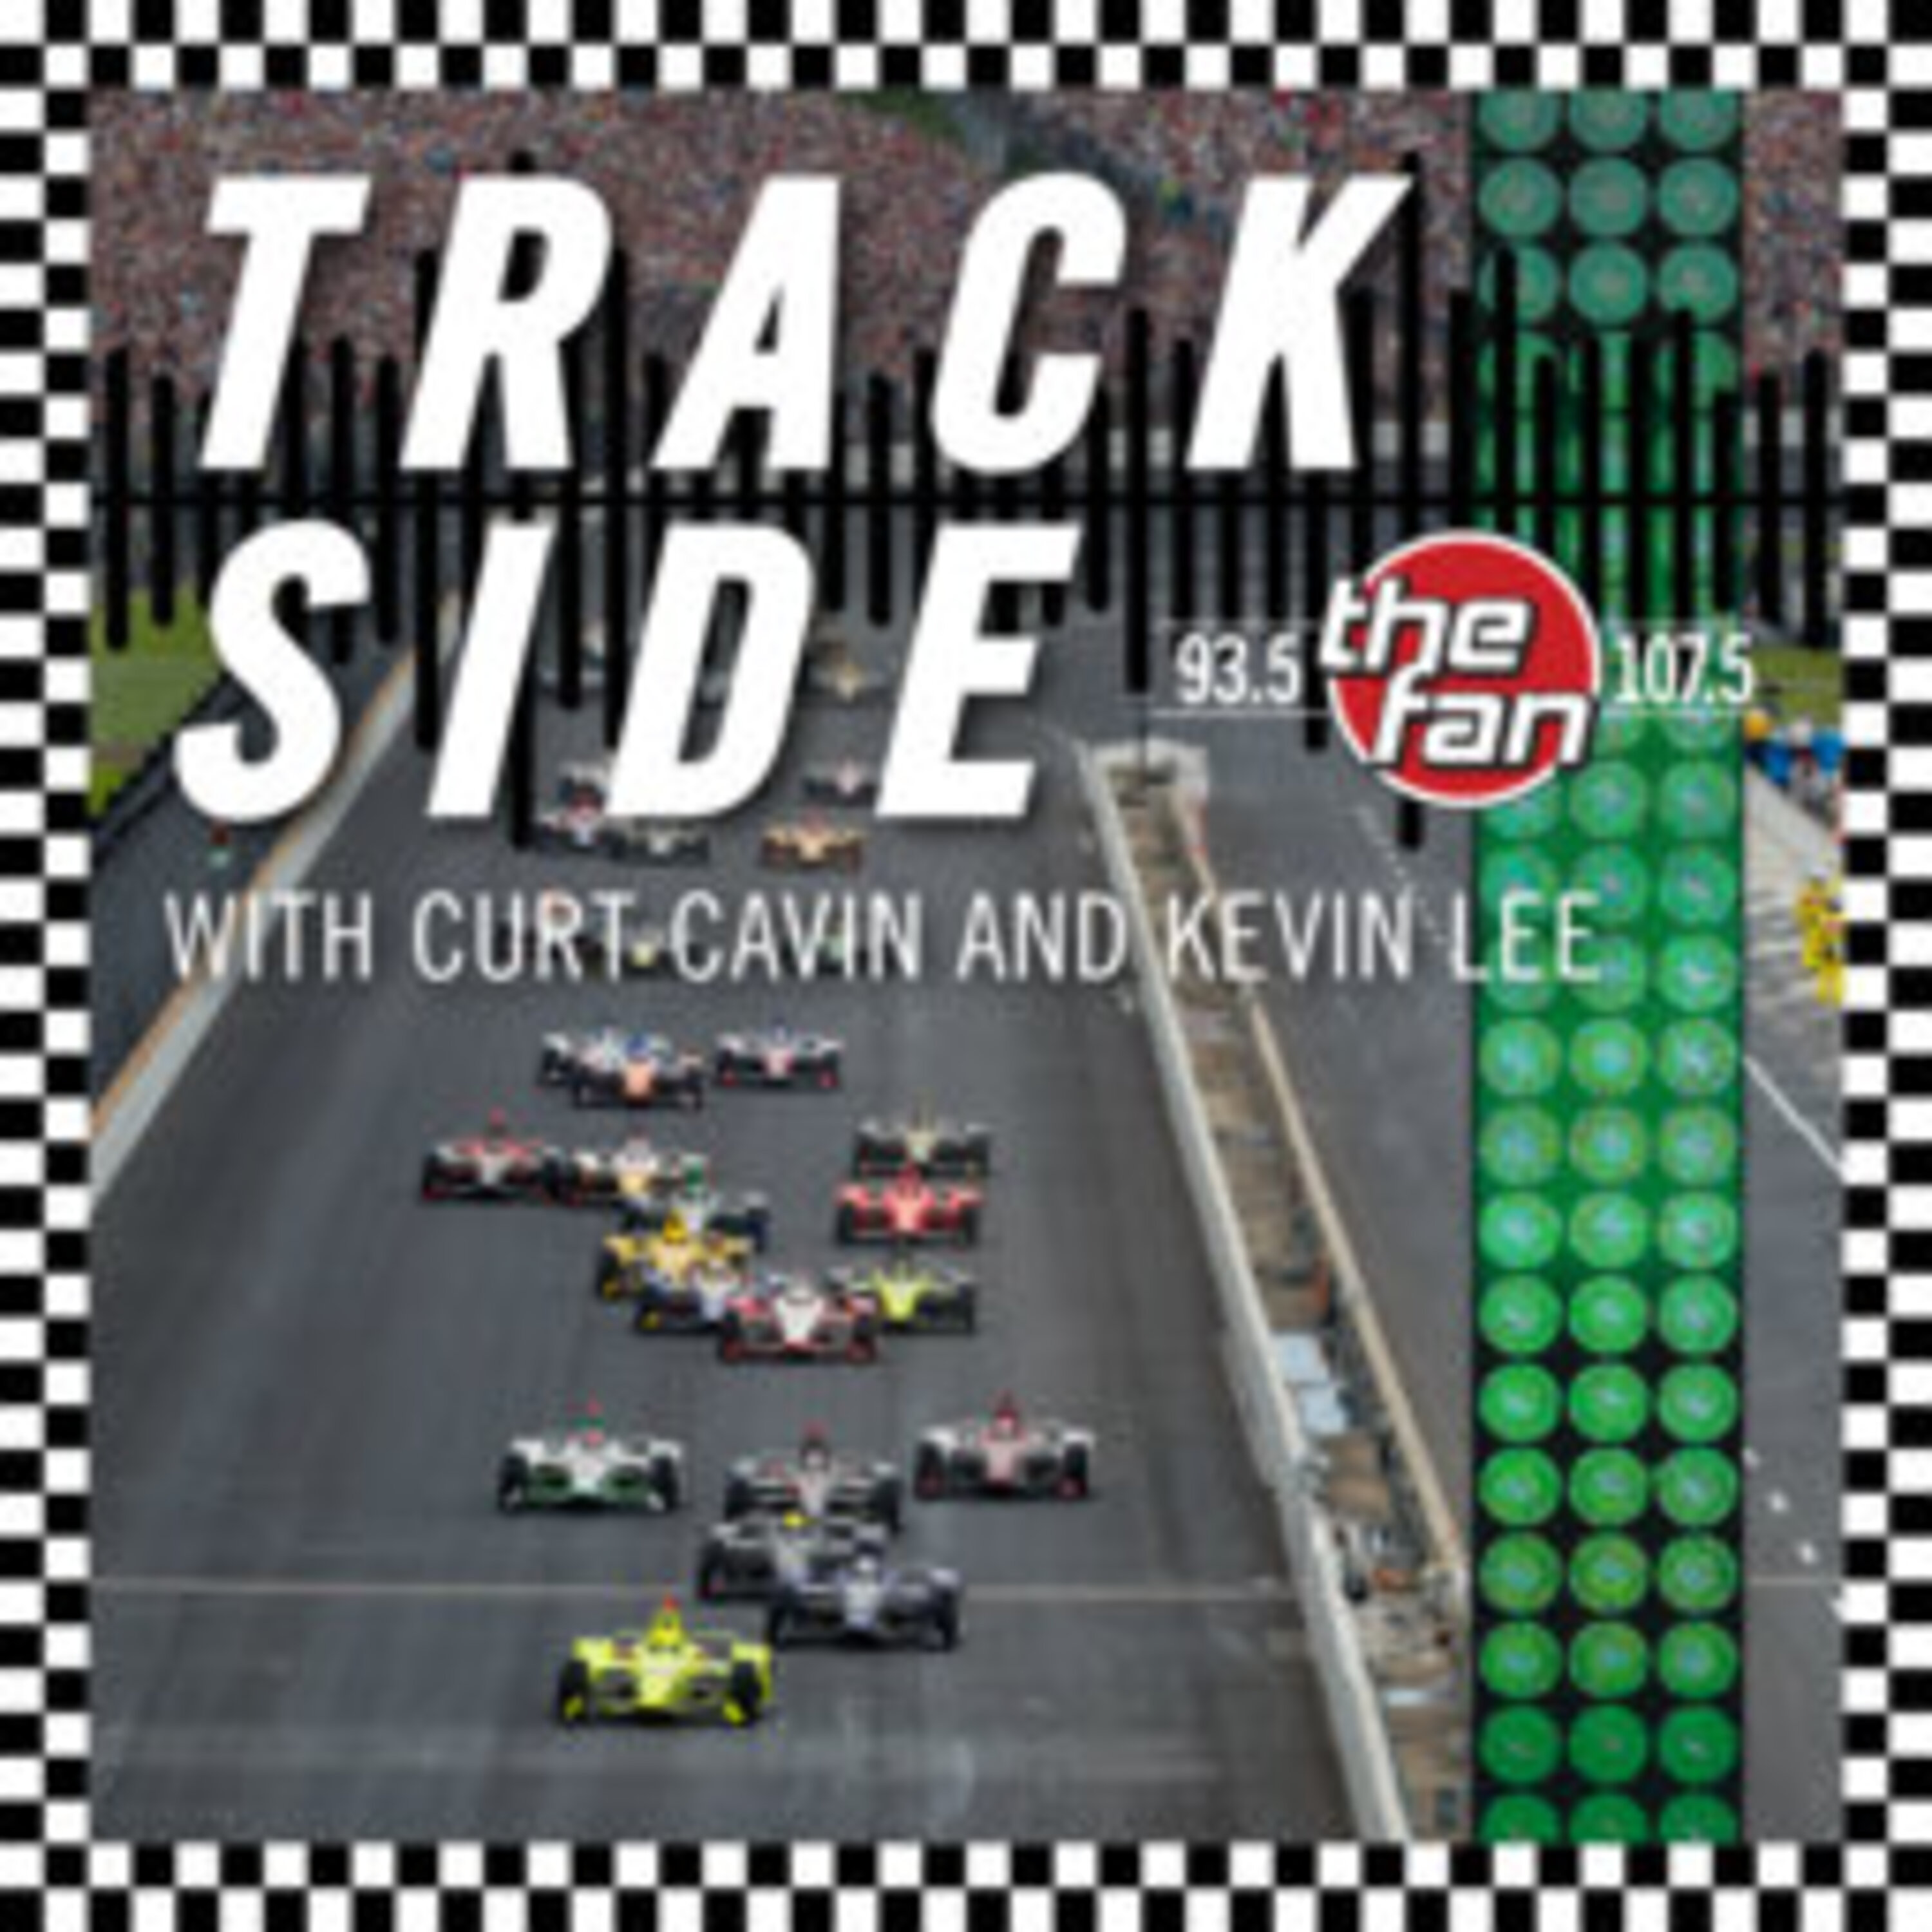 Curt and Kevin talk about IndyCar's summer break, Indy NXT car counts, silly season, and more!